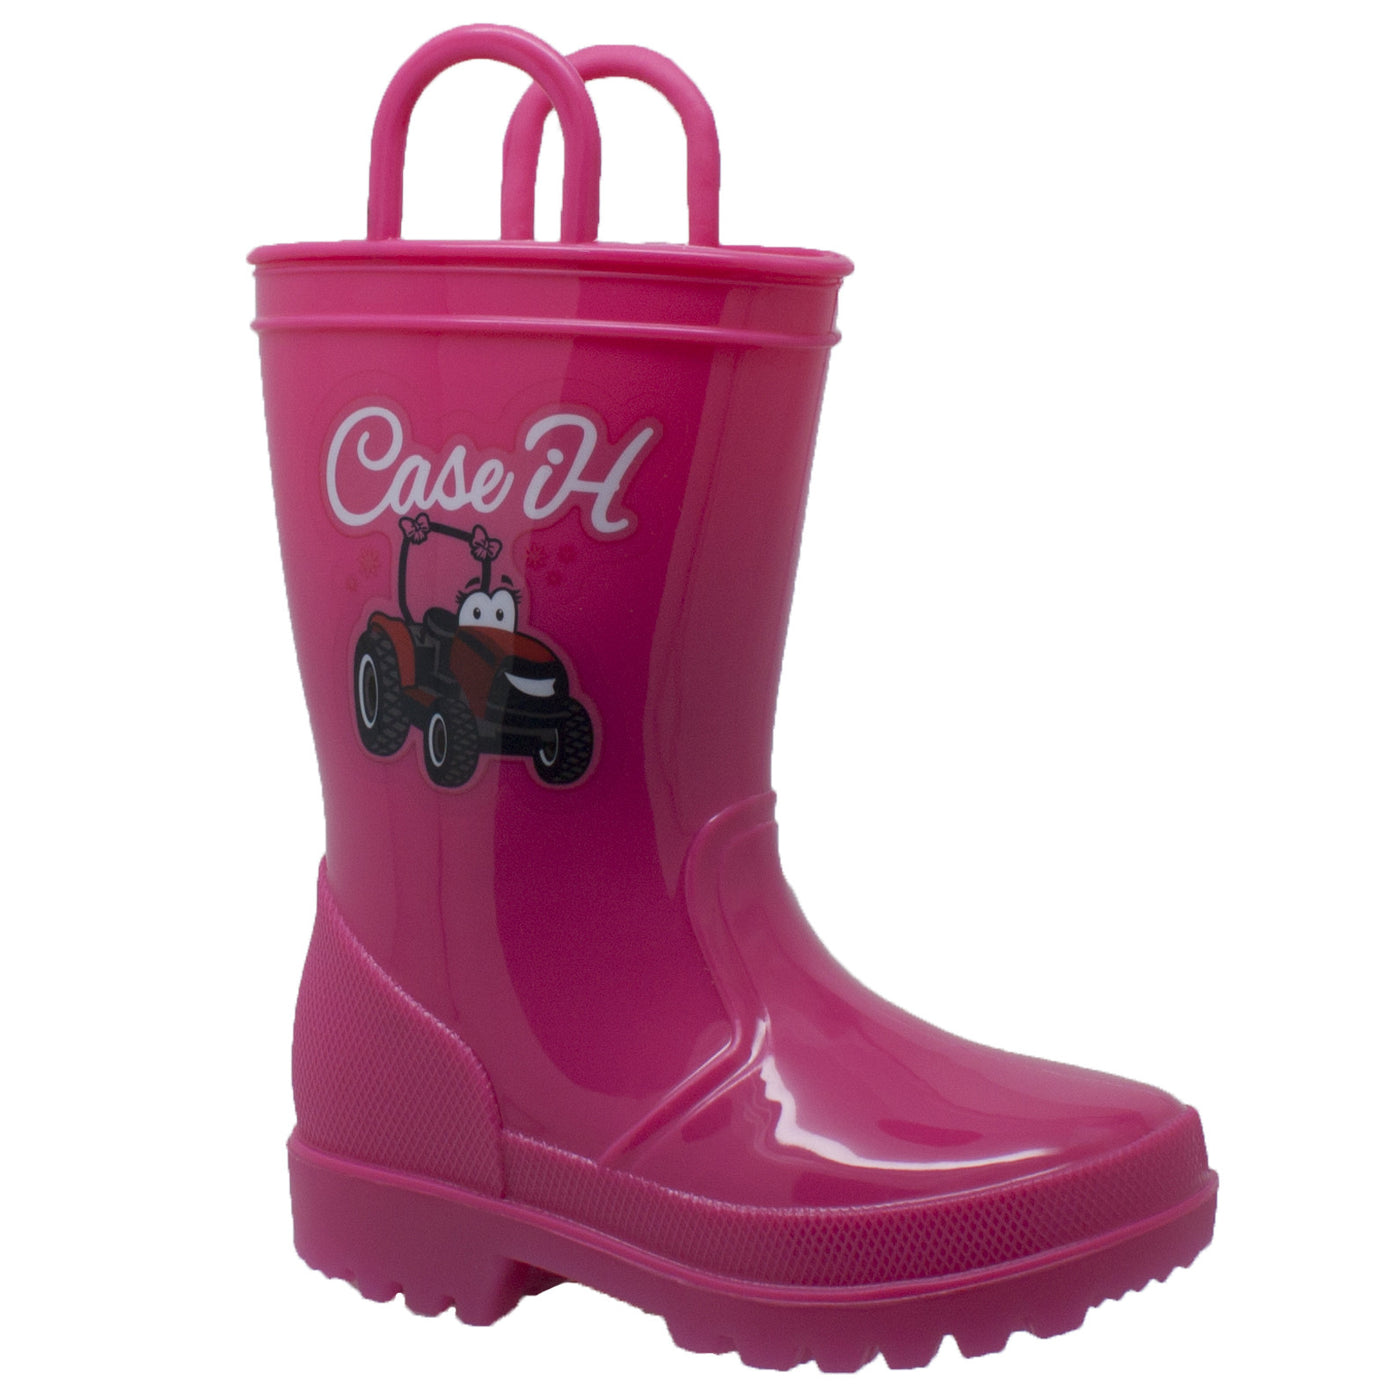 Children's PVC Boot with Light-Up Outsole Pink - CI-4009 - Shop Genuine Leather men & women's boots online | AdTecFootWear